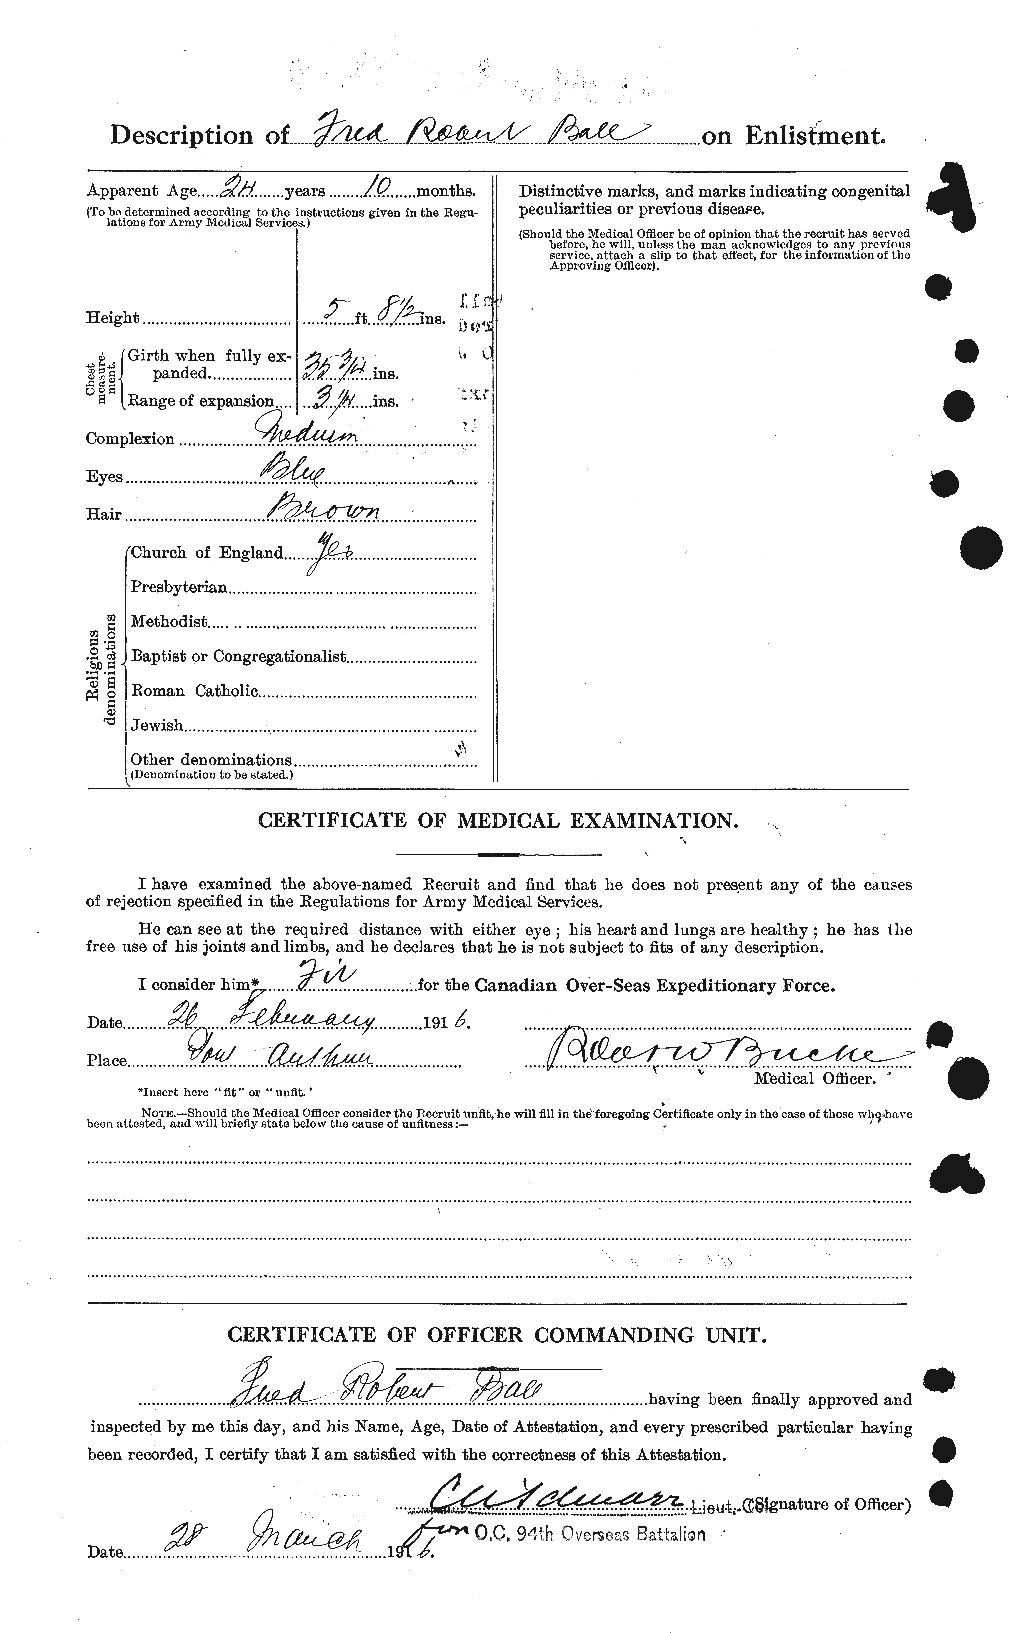 Personnel Records of the First World War - CEF 225783b